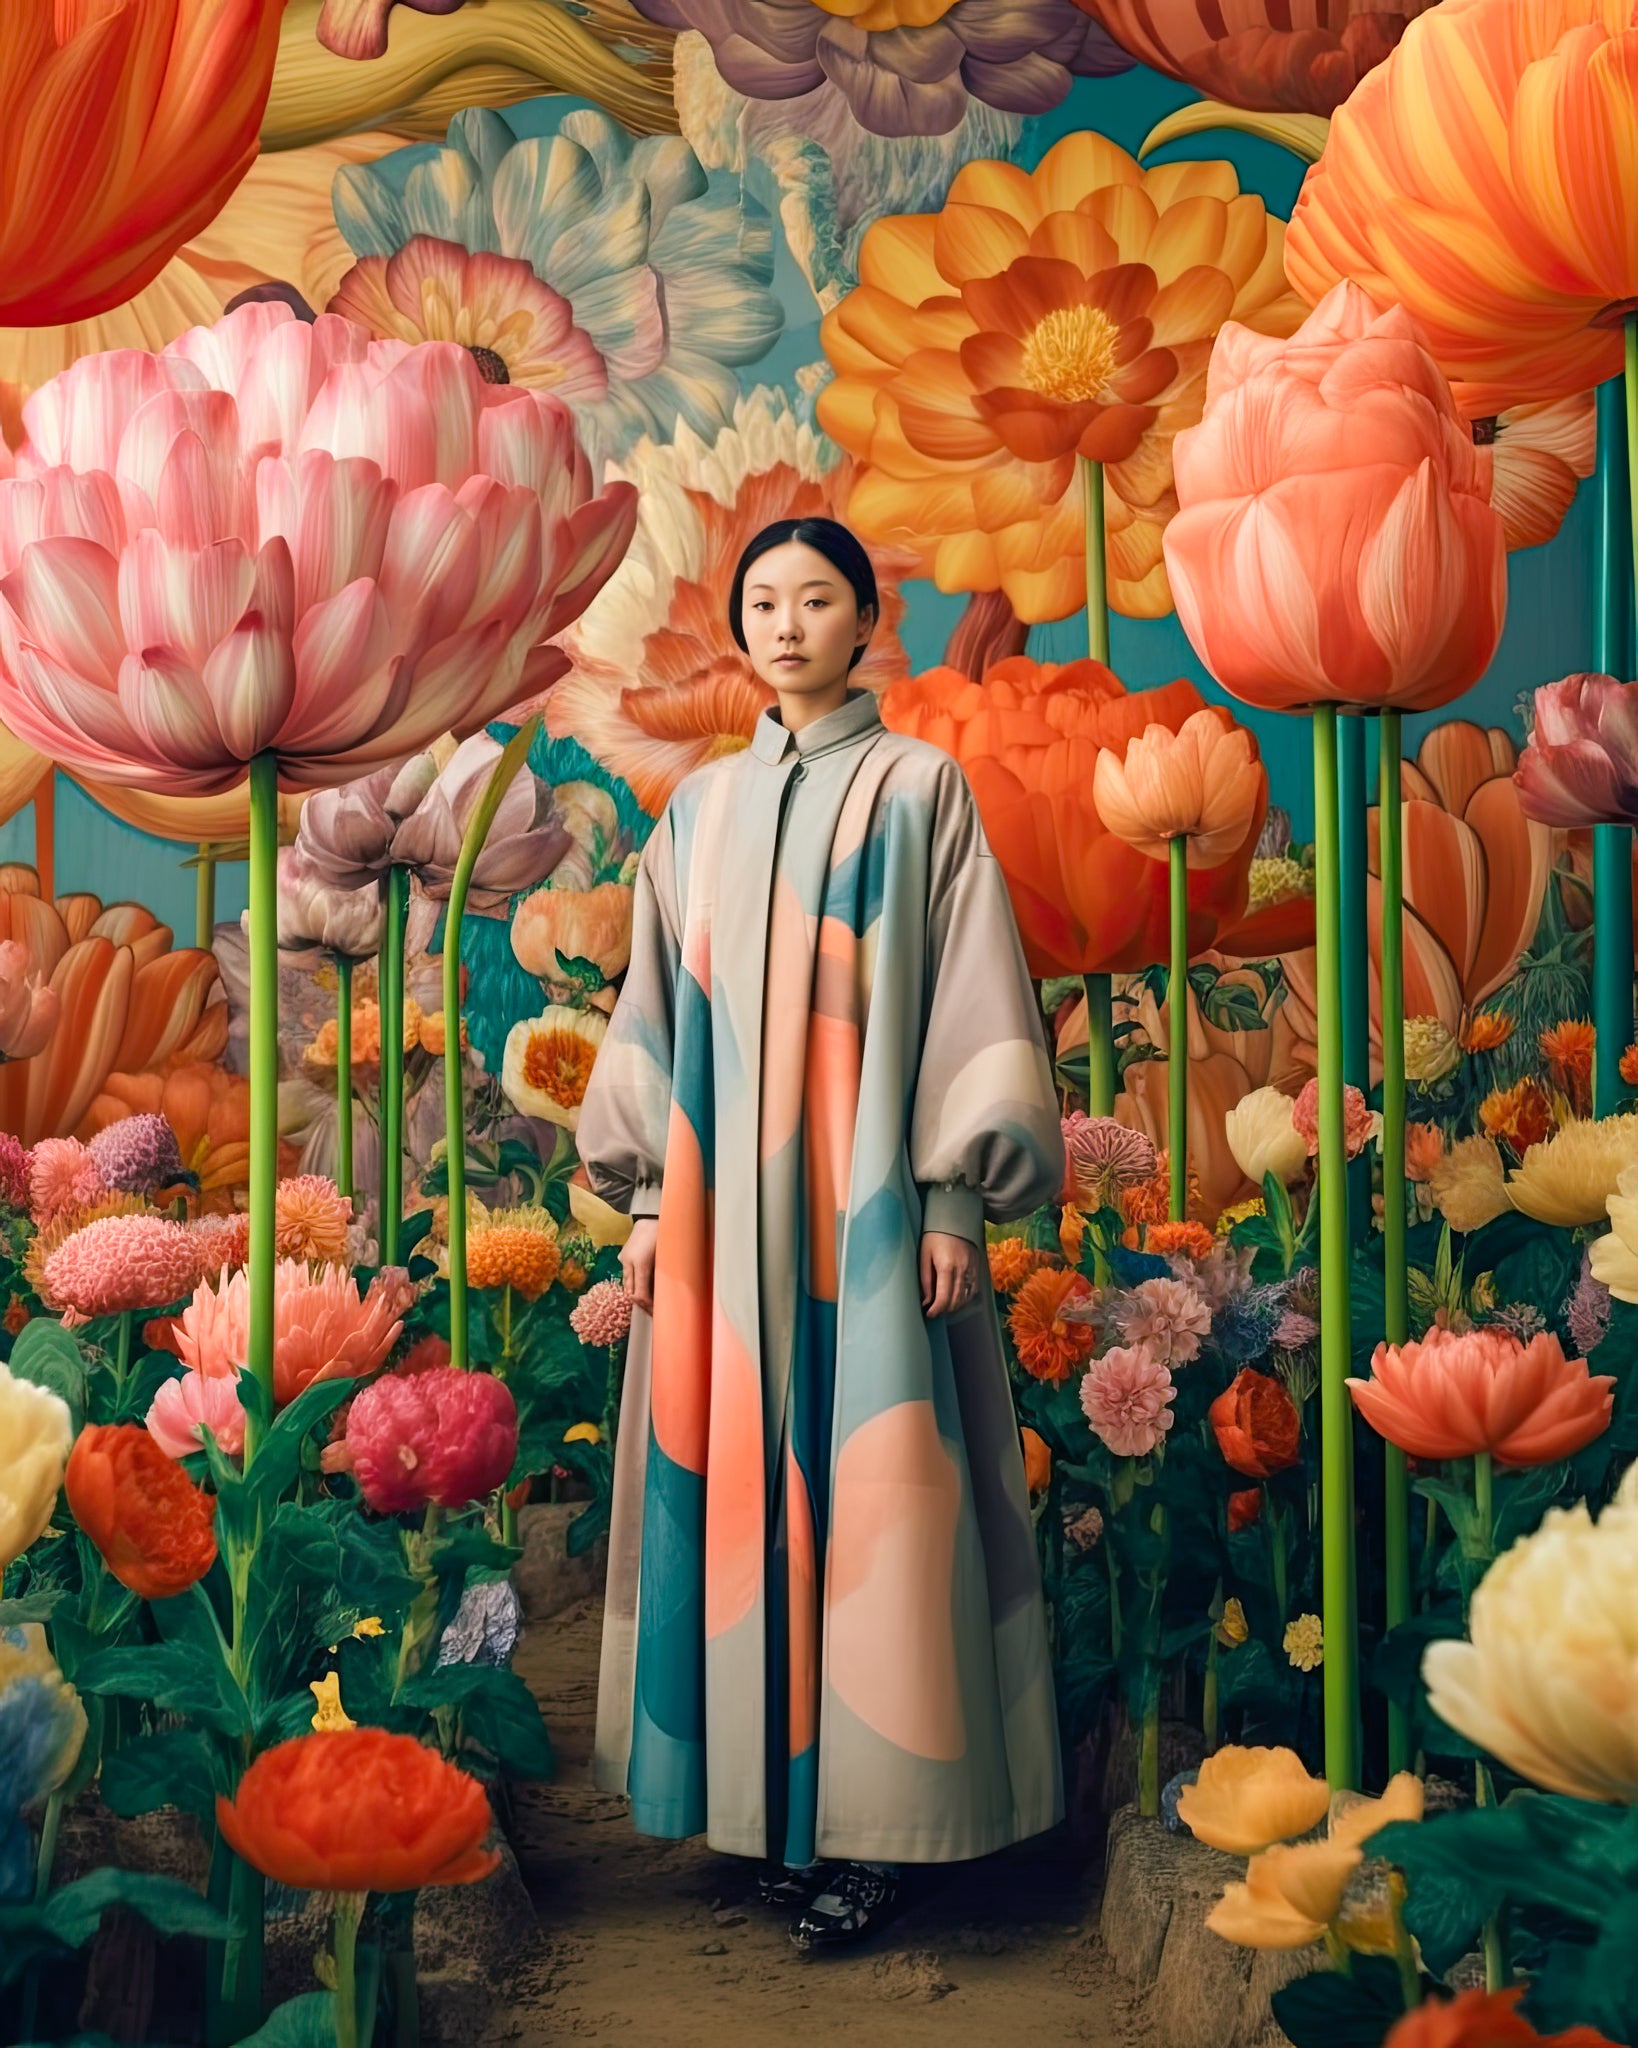 Fine art print featuring a woman standing in a vibrant garden of oversized, colorful flowers, creating a whimsical and enchanting atmosphere. This art print is a stunning example of an artwork print.